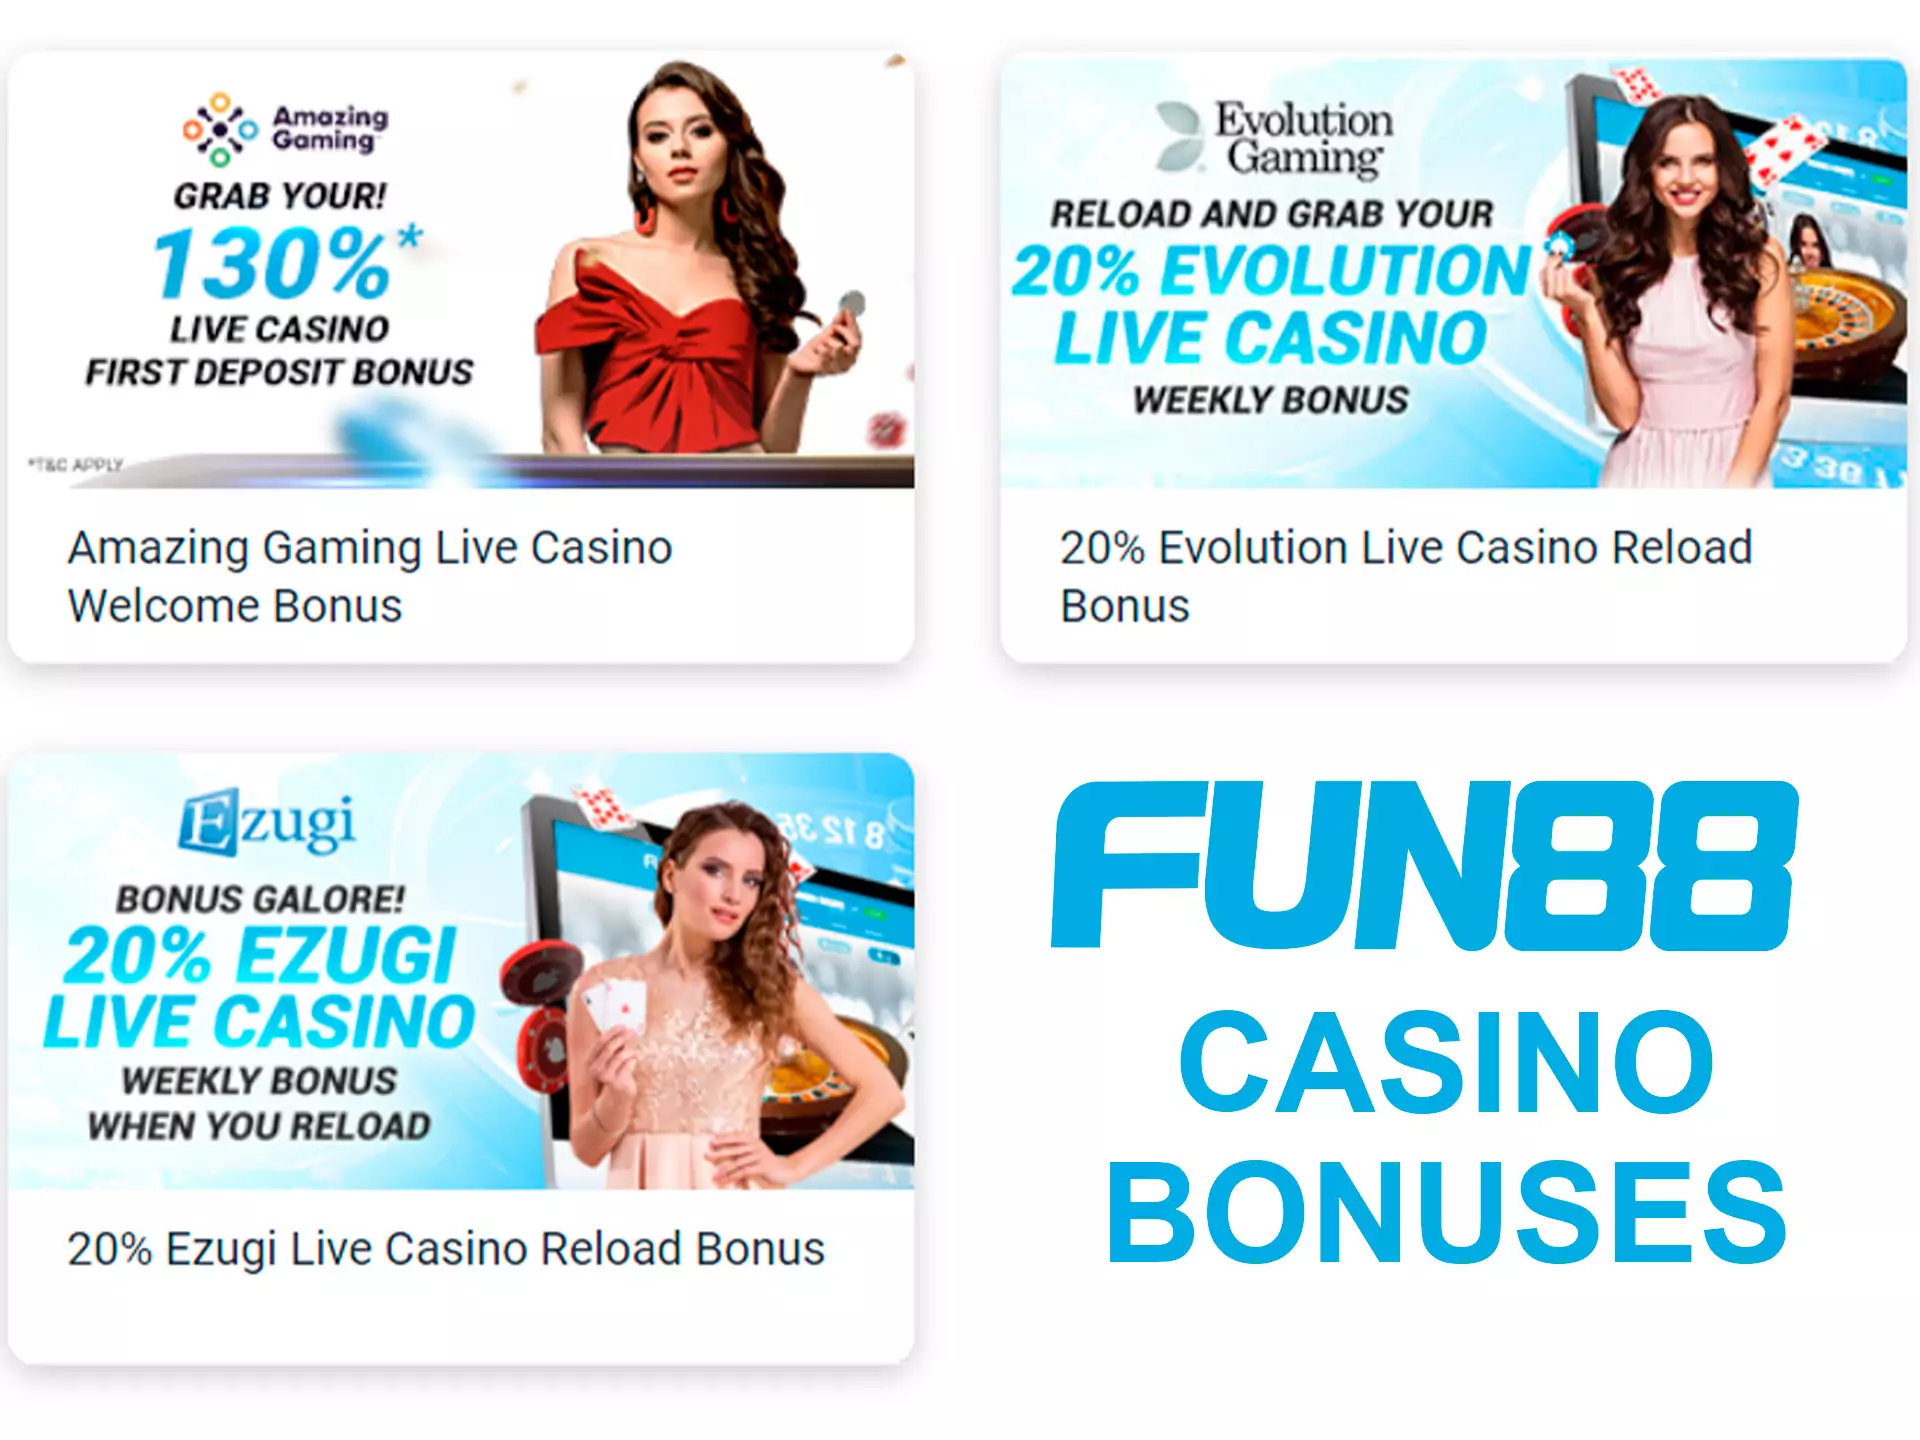 Casino players also will finf attractive bonuses and promo from Fun88.